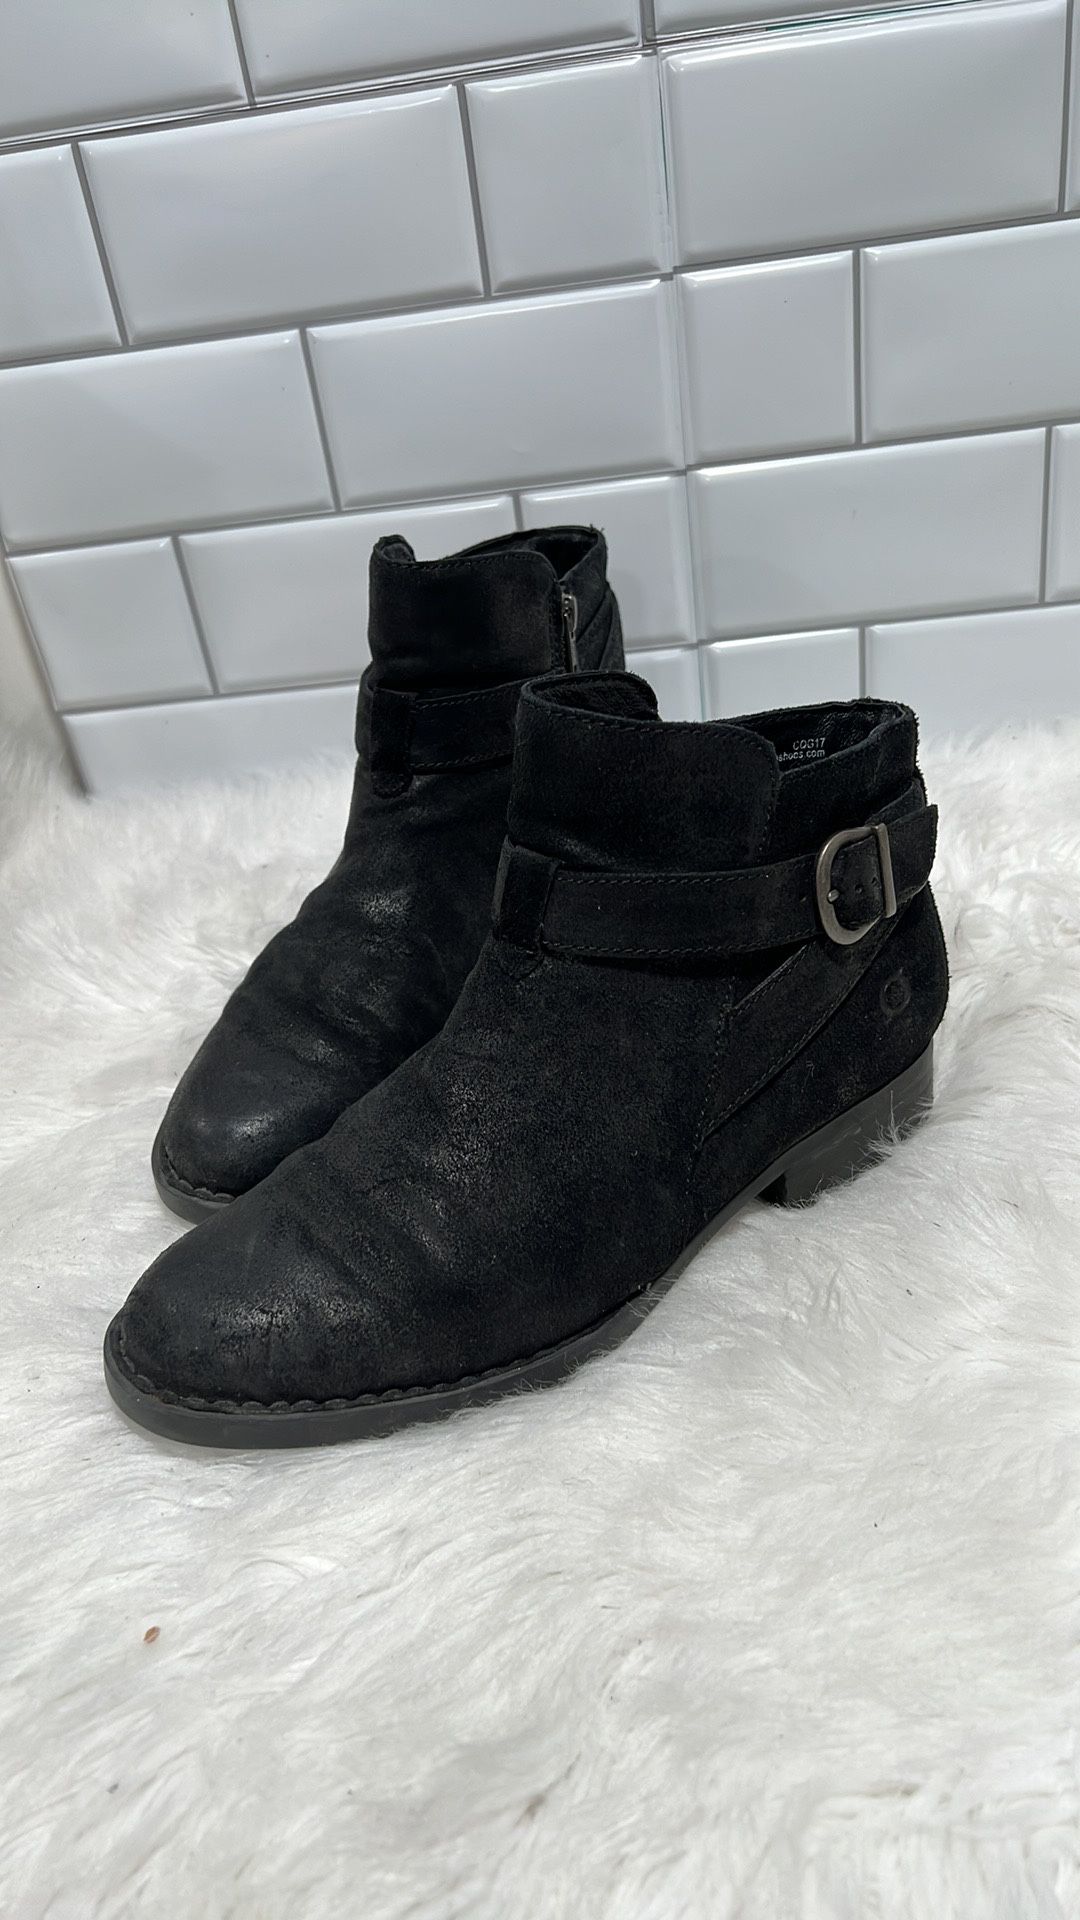 Born Womens Morocco black Leather Buckle Strap Bootie Black Zip Up Boot size 9 M